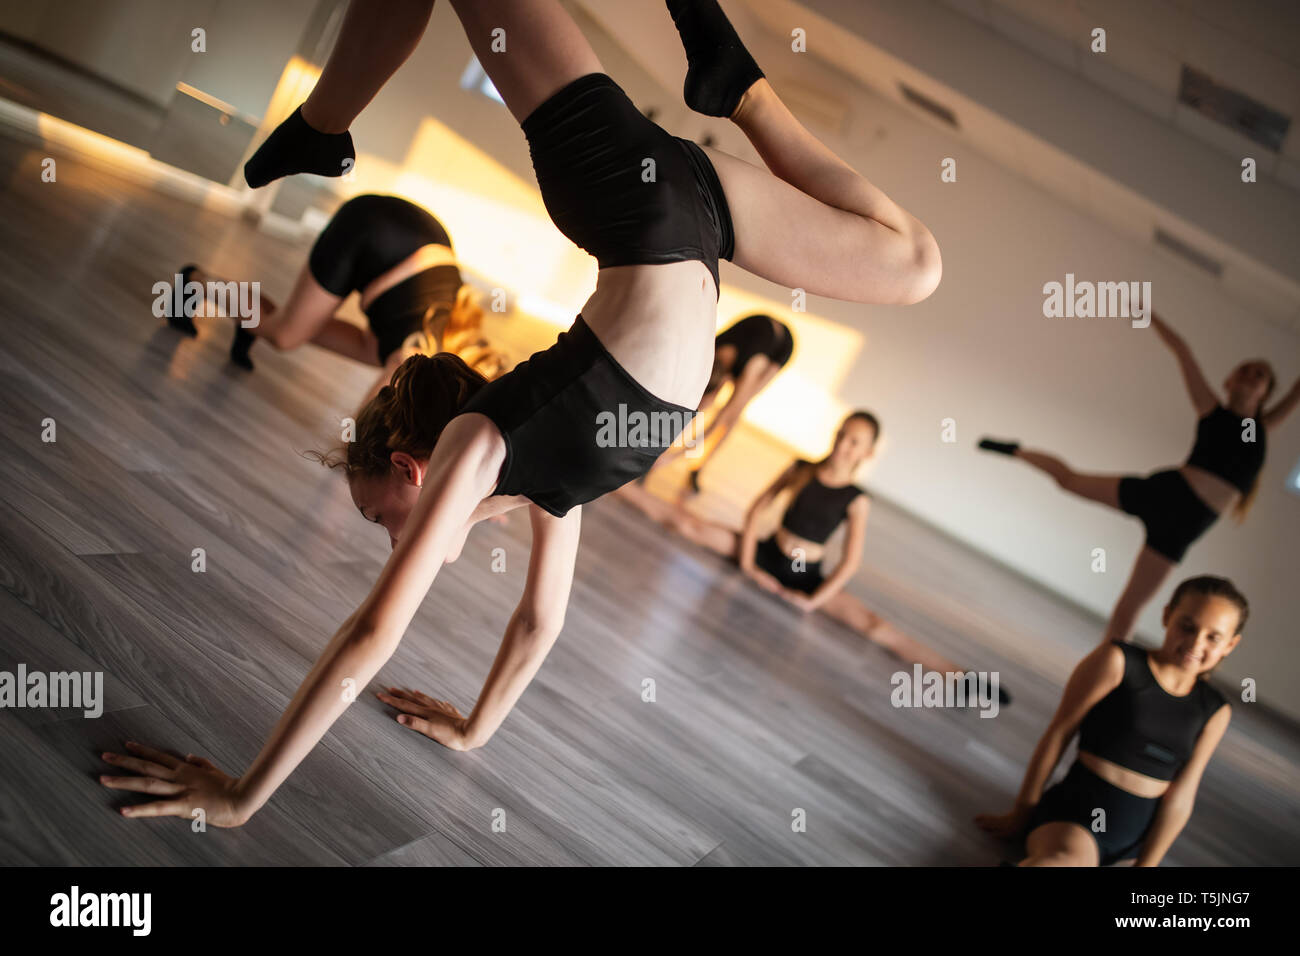 Group of young girls practicing and exercising modern ballet dance. Stock Photo